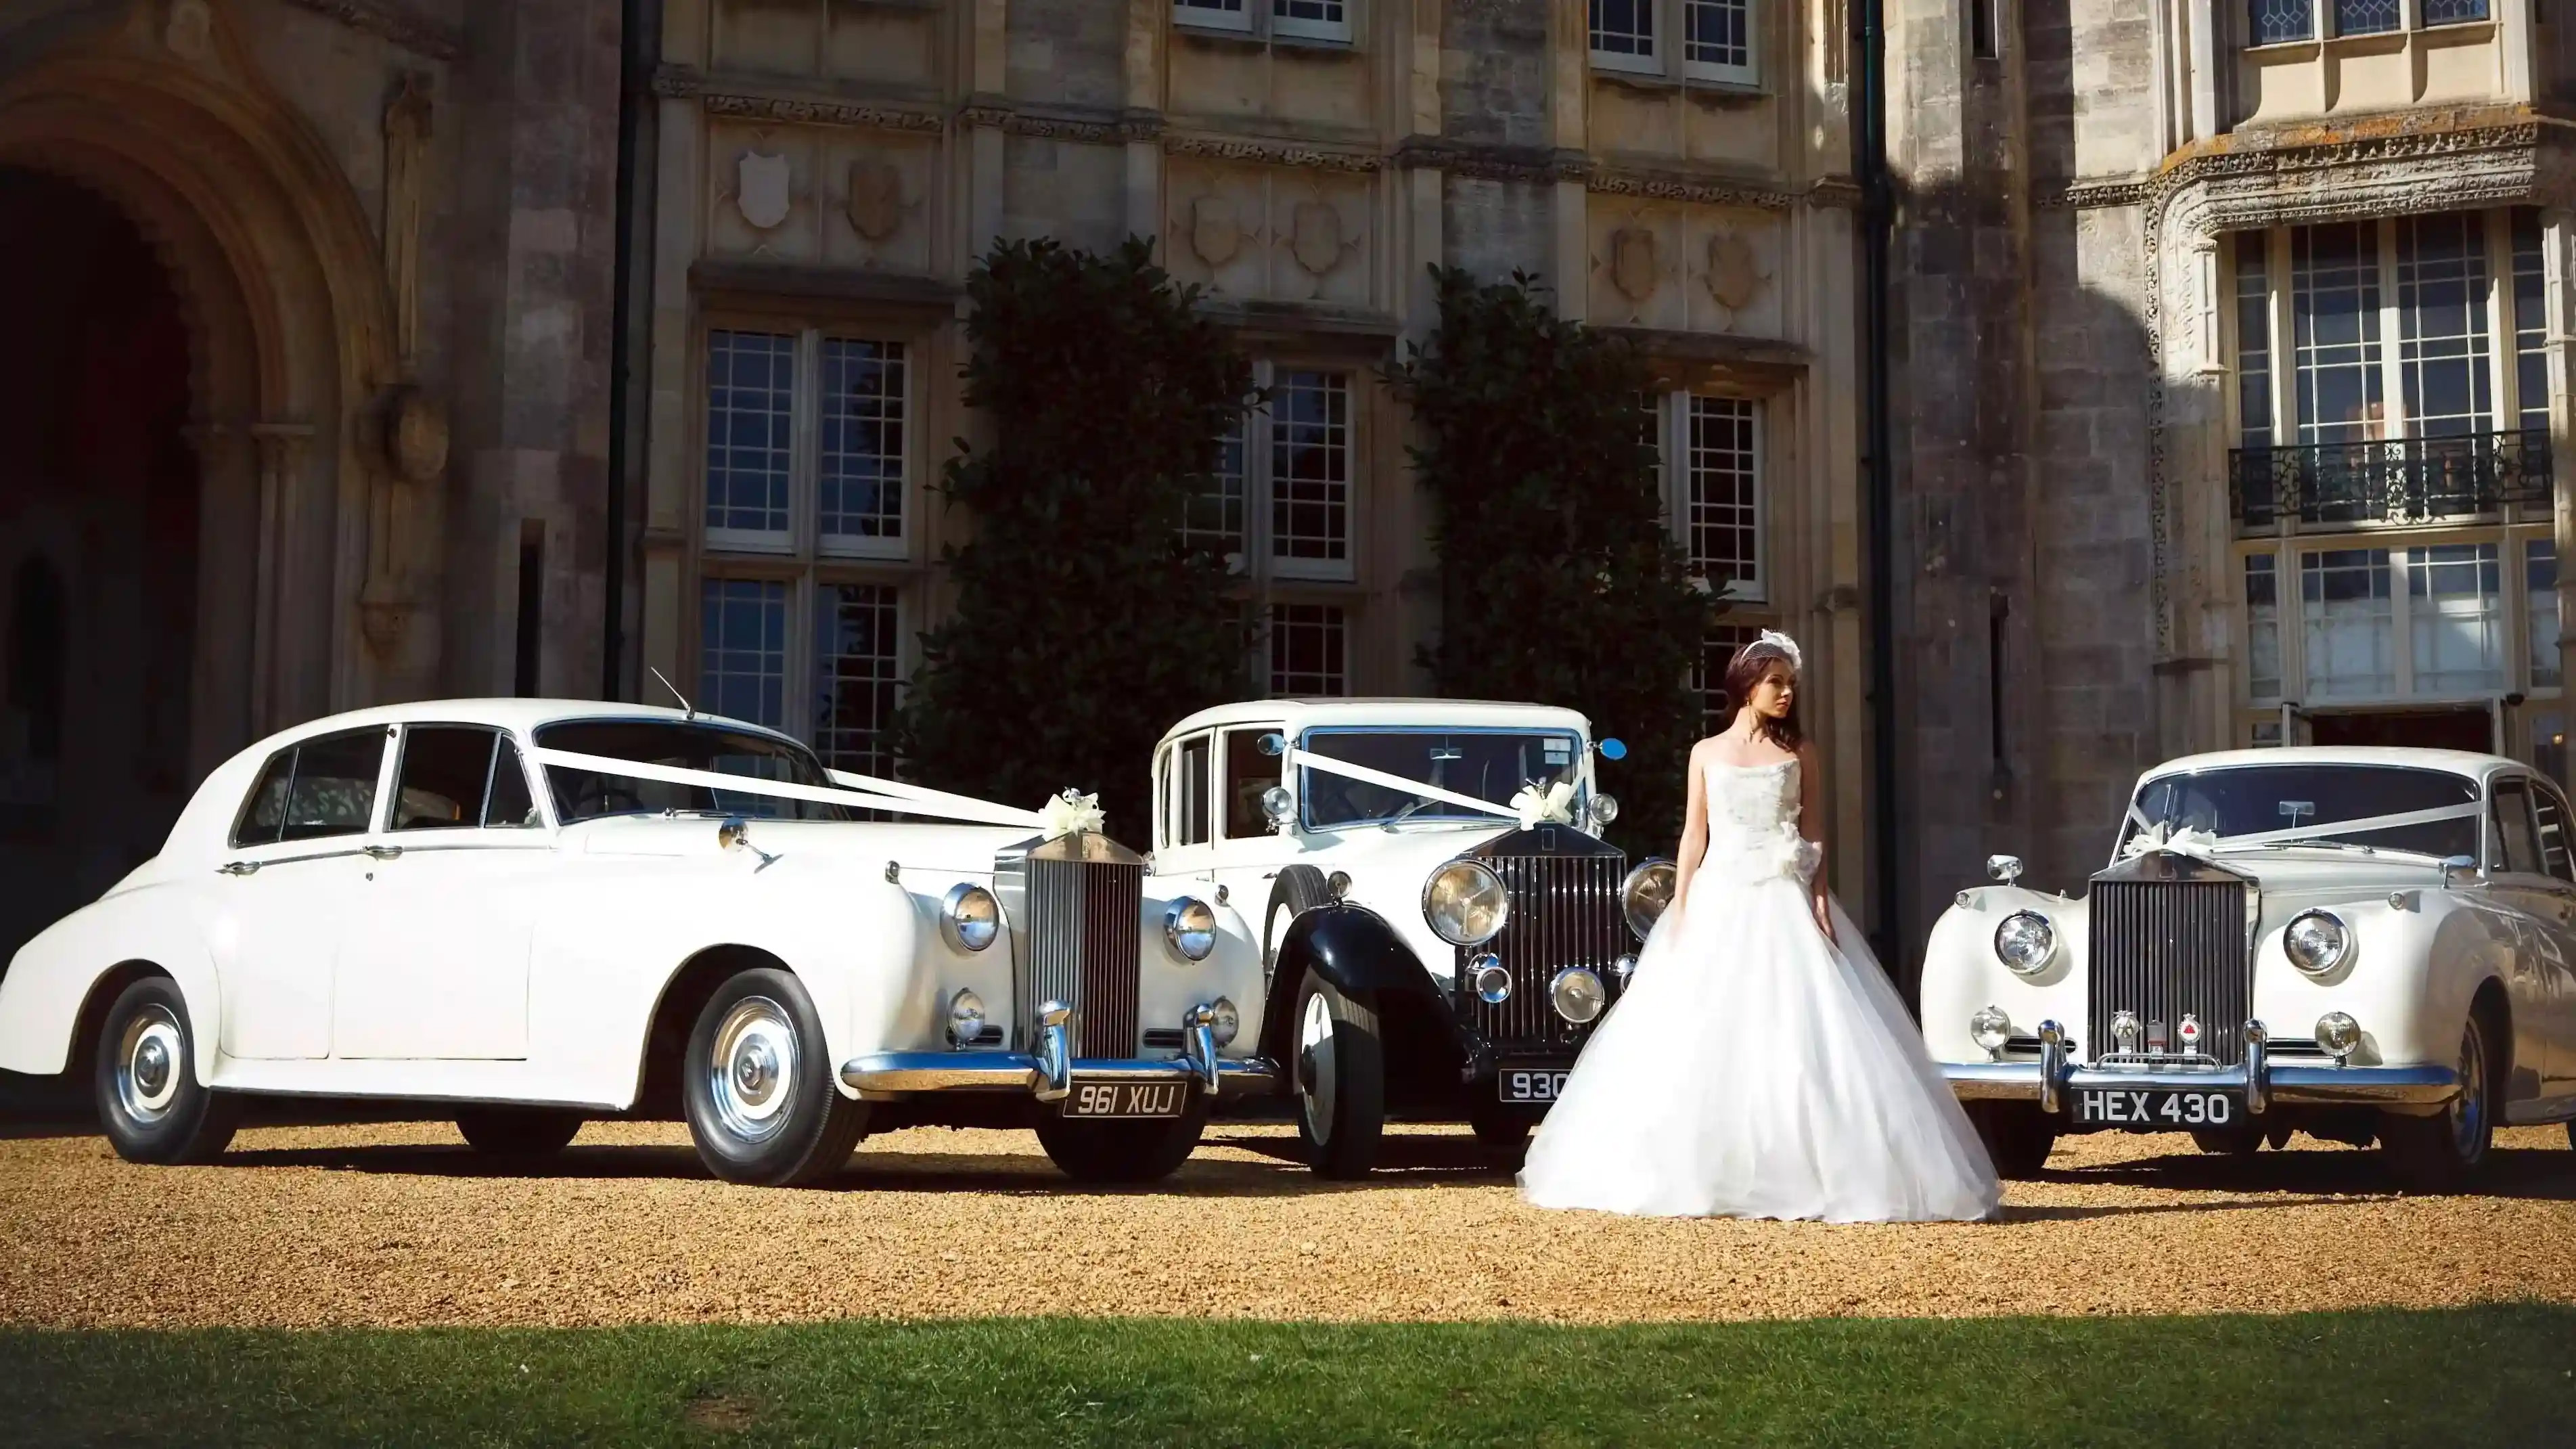 Selection of 3 Classic and Vintage Rolls-Royce Wedding Cars decorated with matching white ribbons and Bride standing in the middle of the vehicles in her large white wedding dress.